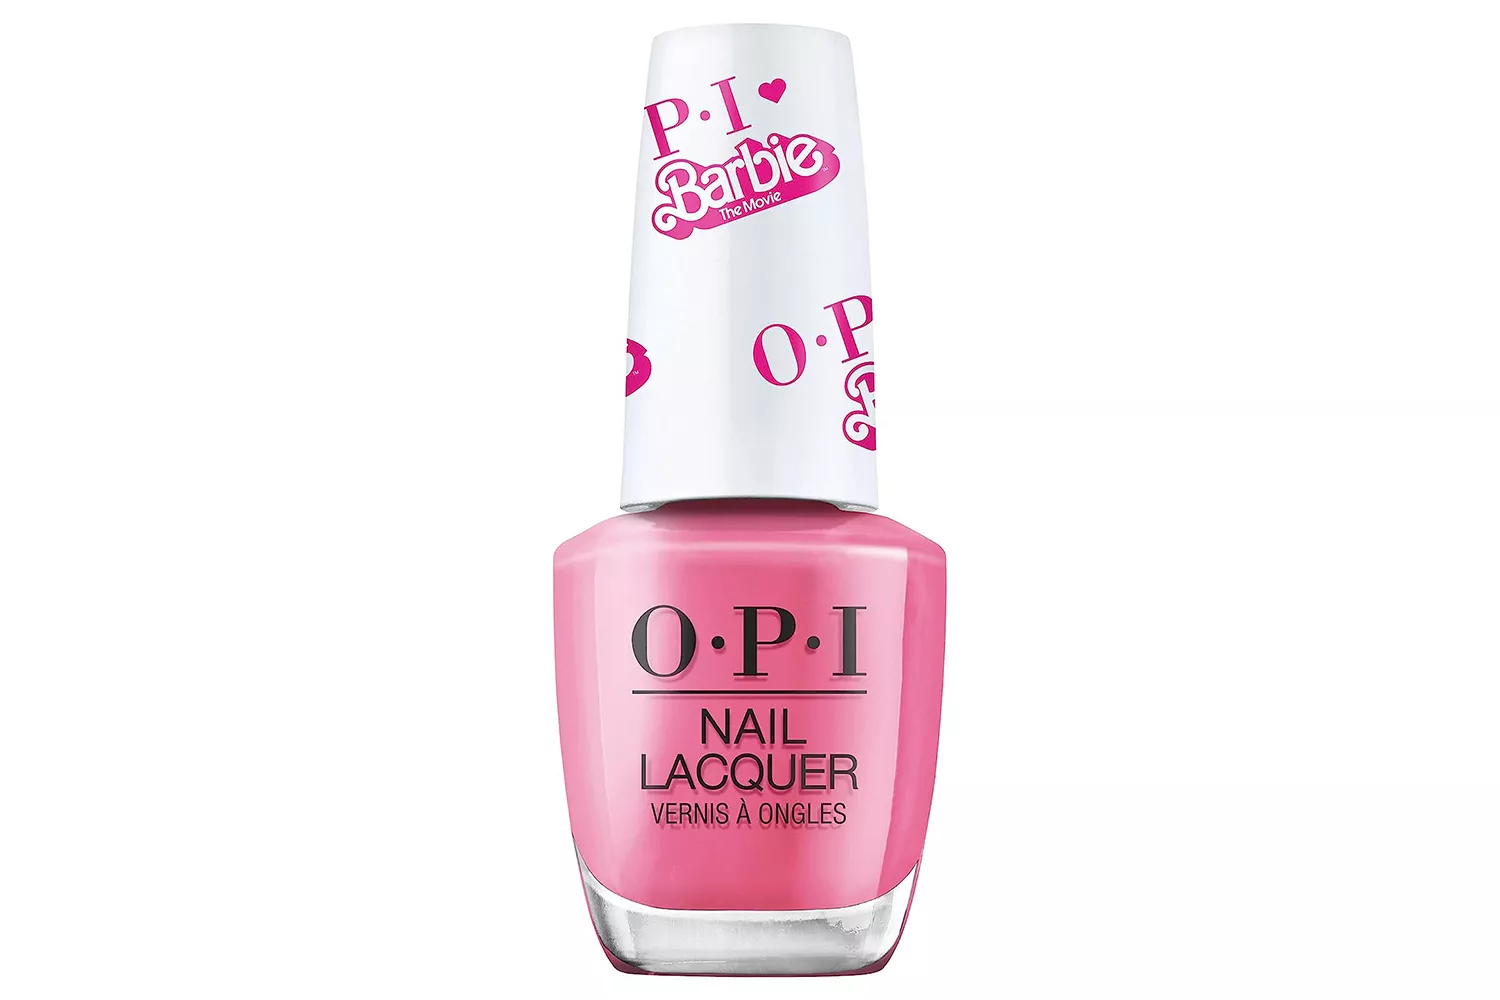 Nail Lacquer, OPIxBarbie Limited Edition Collection Hi Barbie!